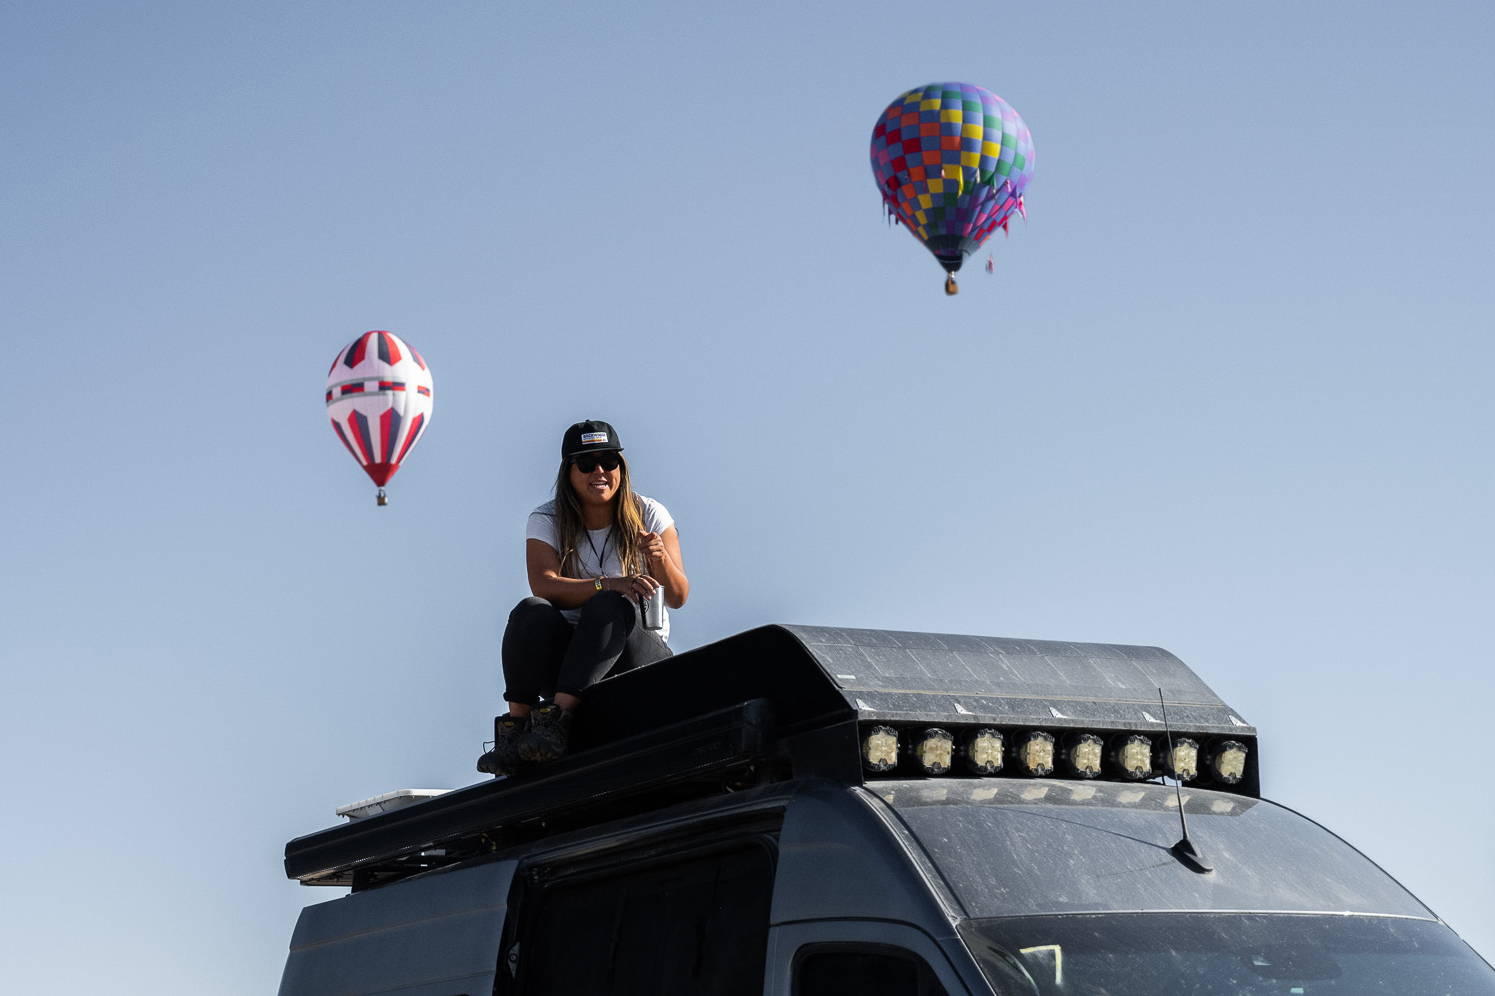 Emily Pan on her Stealth MODE at the Albuquerque Balloon Fiesta